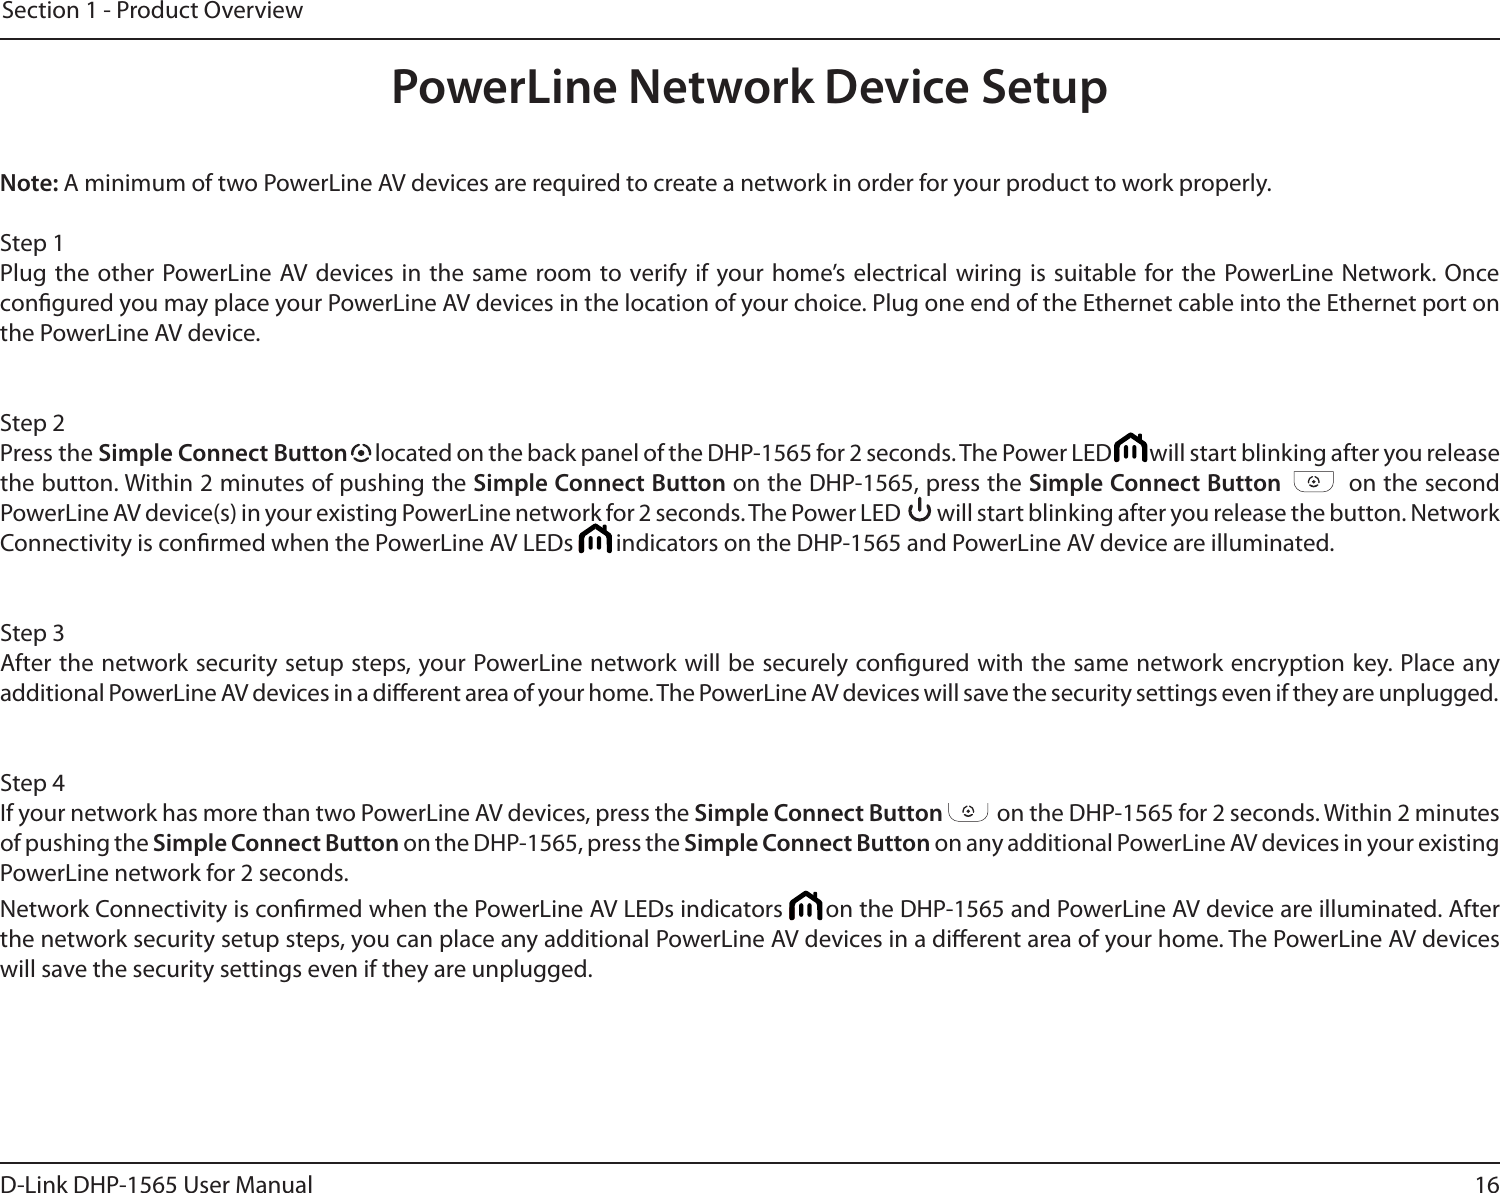 16D-Link DHP-1565 User ManualSection 1 - Product OverviewNote: A minimum of two PowerLine AV devices are required to create a network in order for your product to work properly.Step 1Plug the other PowerLine AV devices in the same room to verify if your home’s electrical wiring is suitable for the PowerLine Network. Once congured you may place your PowerLine AV devices in the location of your choice. Plug one end of the Ethernet cable into the Ethernet port on the PowerLine AV device. Step 2Press the Simple Connect Button   located on the back panel of the DHP-1565 for 2 seconds. The Power LED         will start blinking after you release the button. Within 2 minutes of pushing the Simple Connect Button on the DHP-1565, press the Simple Connect Button          on the second PowerLine AV device(s) in your existing PowerLine network for 2 seconds. The Power LED         will start blinking after you release the button. Network Connectivity is conrmed when the PowerLine AV LEDs        indicators on the DHP-1565 and PowerLine AV device are illuminated. Step 3After the network security setup steps, your PowerLine network will be securely congured with the same network encryption key. Place any additional PowerLine AV devices in a dierent area of your home. The PowerLine AV devices will save the security settings even if they are unplugged.Step 4If your network has more than two PowerLine AV devices, press the Simple Connect Button           on the DHP-1565 for 2 seconds. Within 2 minutes of pushing the Simple Connect Button on the DHP-1565, press the Simple Connect Button on any additional PowerLine AV devices in your existing PowerLine network for 2 seconds. Network Connectivity is conrmed when the PowerLine AV LEDs indicators       on the DHP-1565 and PowerLine AV device are illuminated. After the network security setup steps, you can place any additional PowerLine AV devices in a dierent area of your home. The PowerLine AV devices will save the security settings even if they are unplugged.PowerLine Network Device Setup